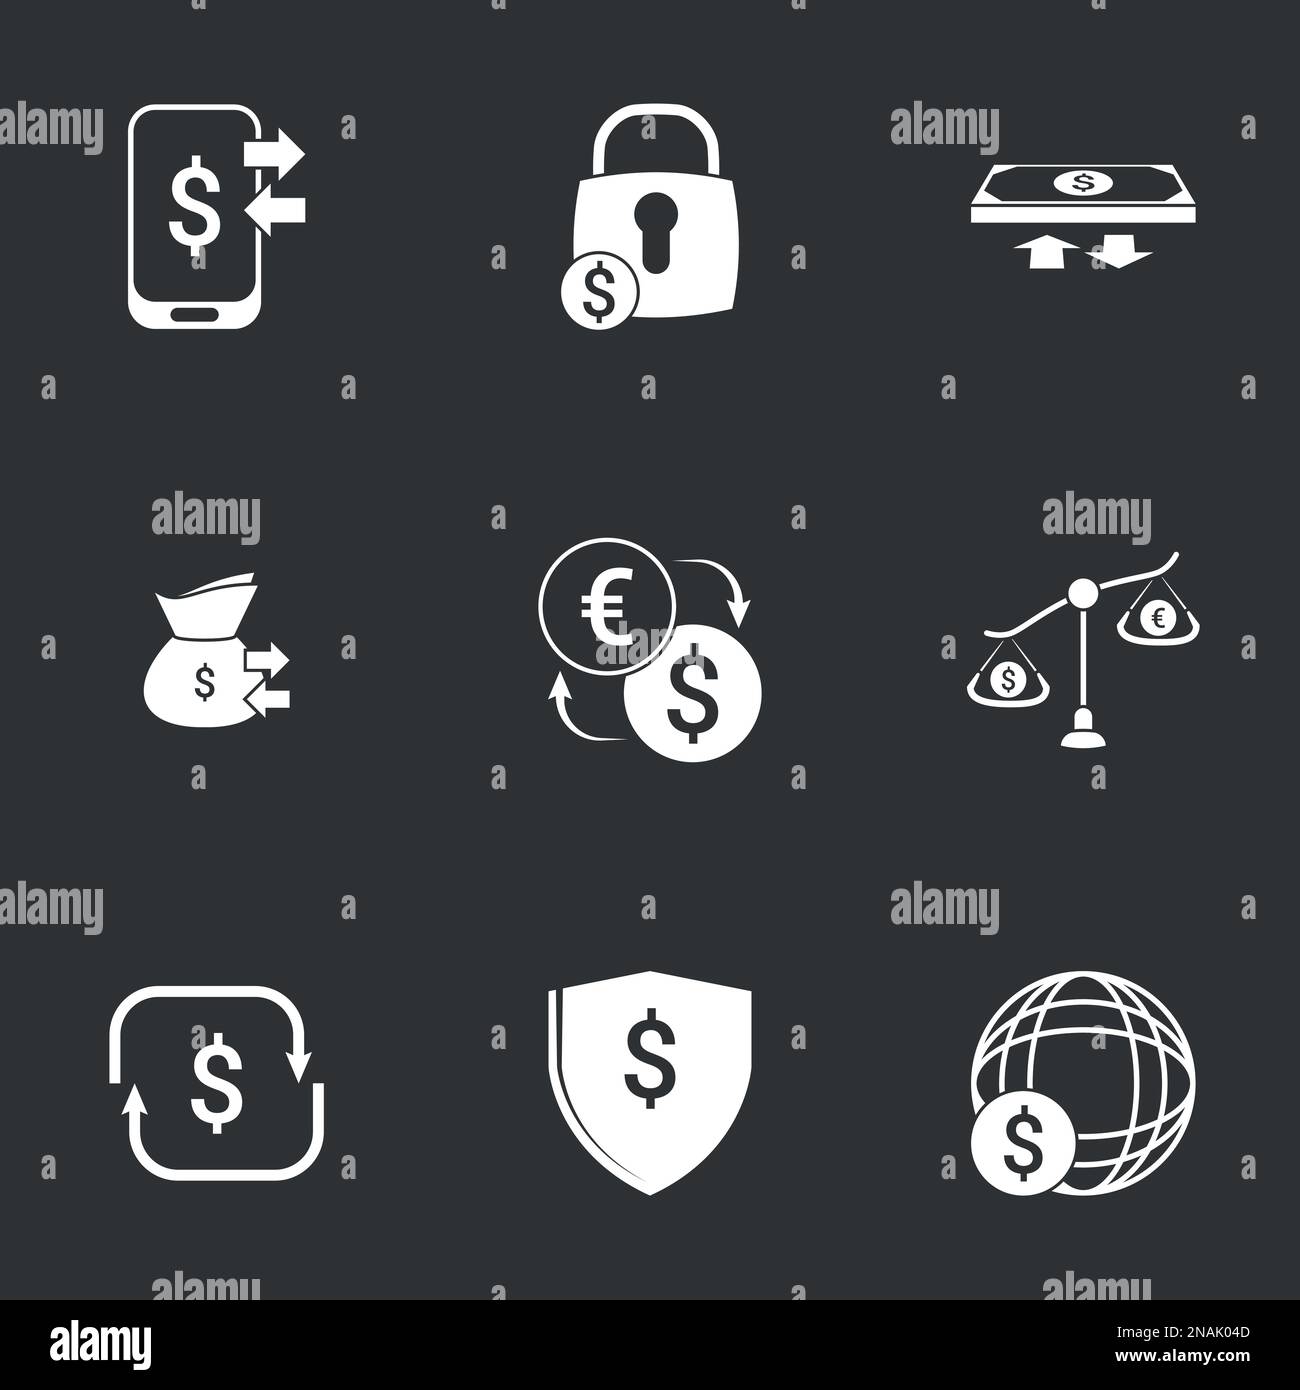 Simple icon set related to Money. Black background Stock Vector